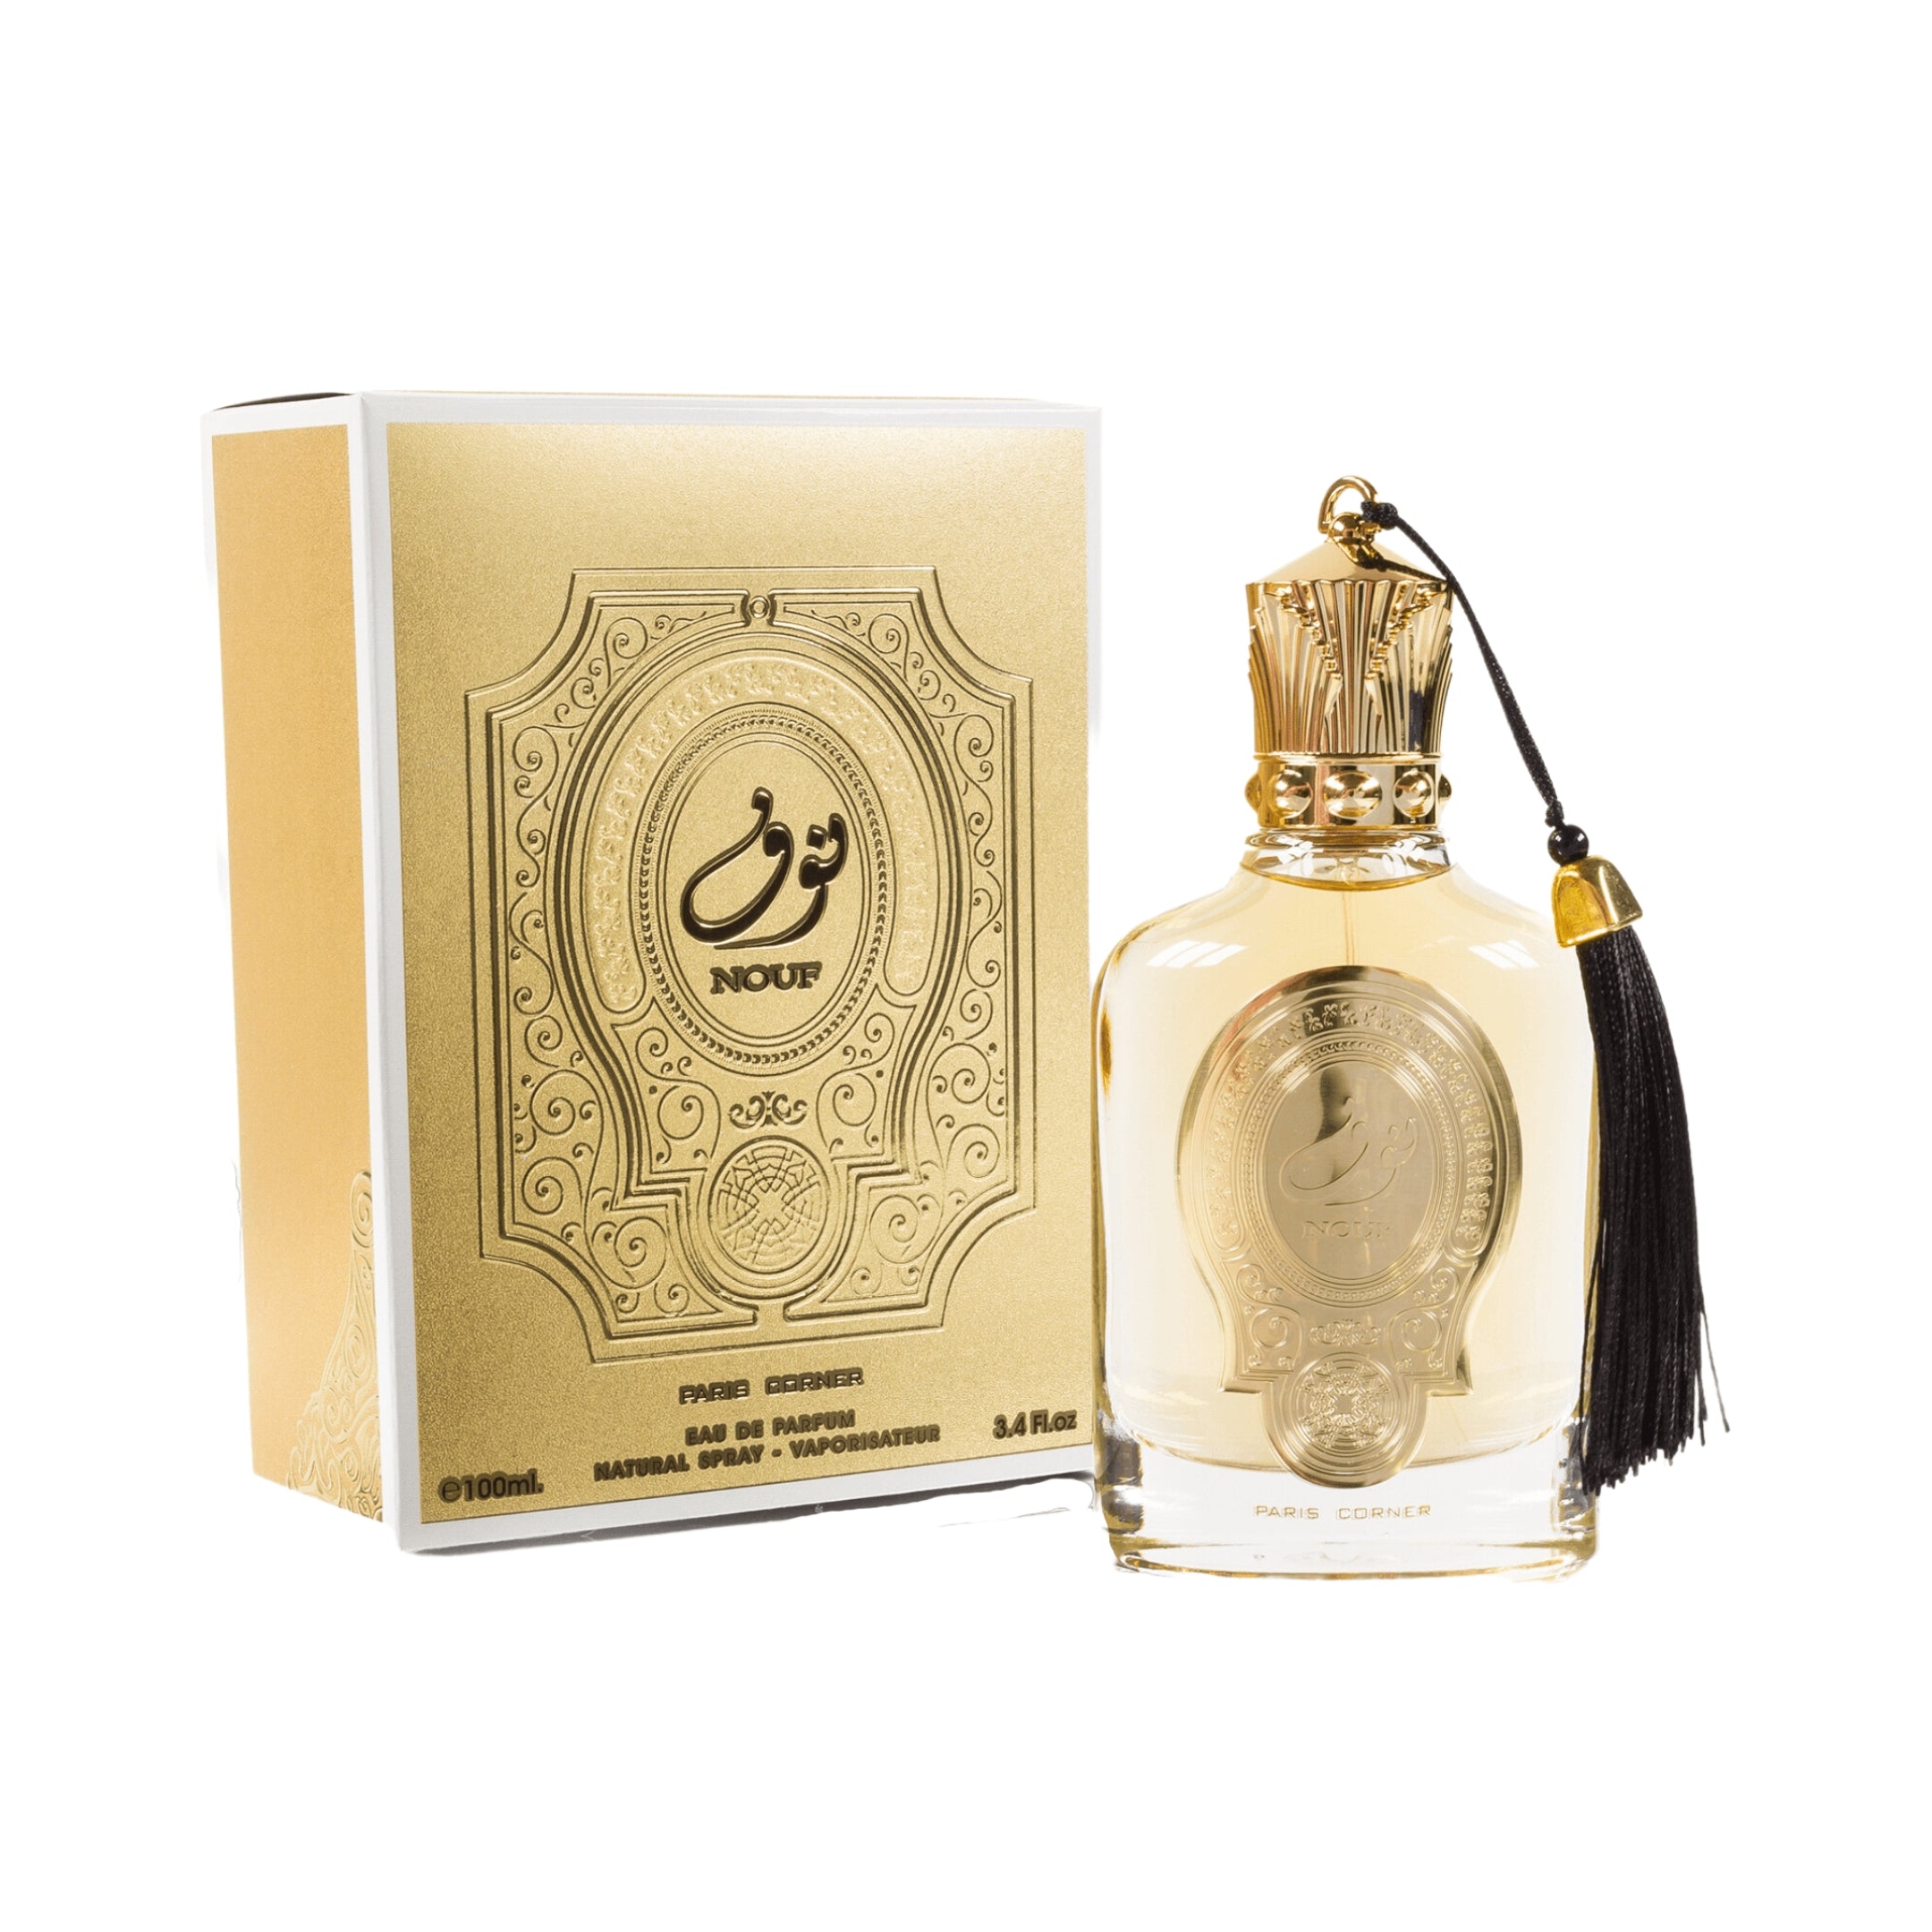 L'ORIENTALE FRAGRANCES Long-Lasting Up to 24 Hours Scent